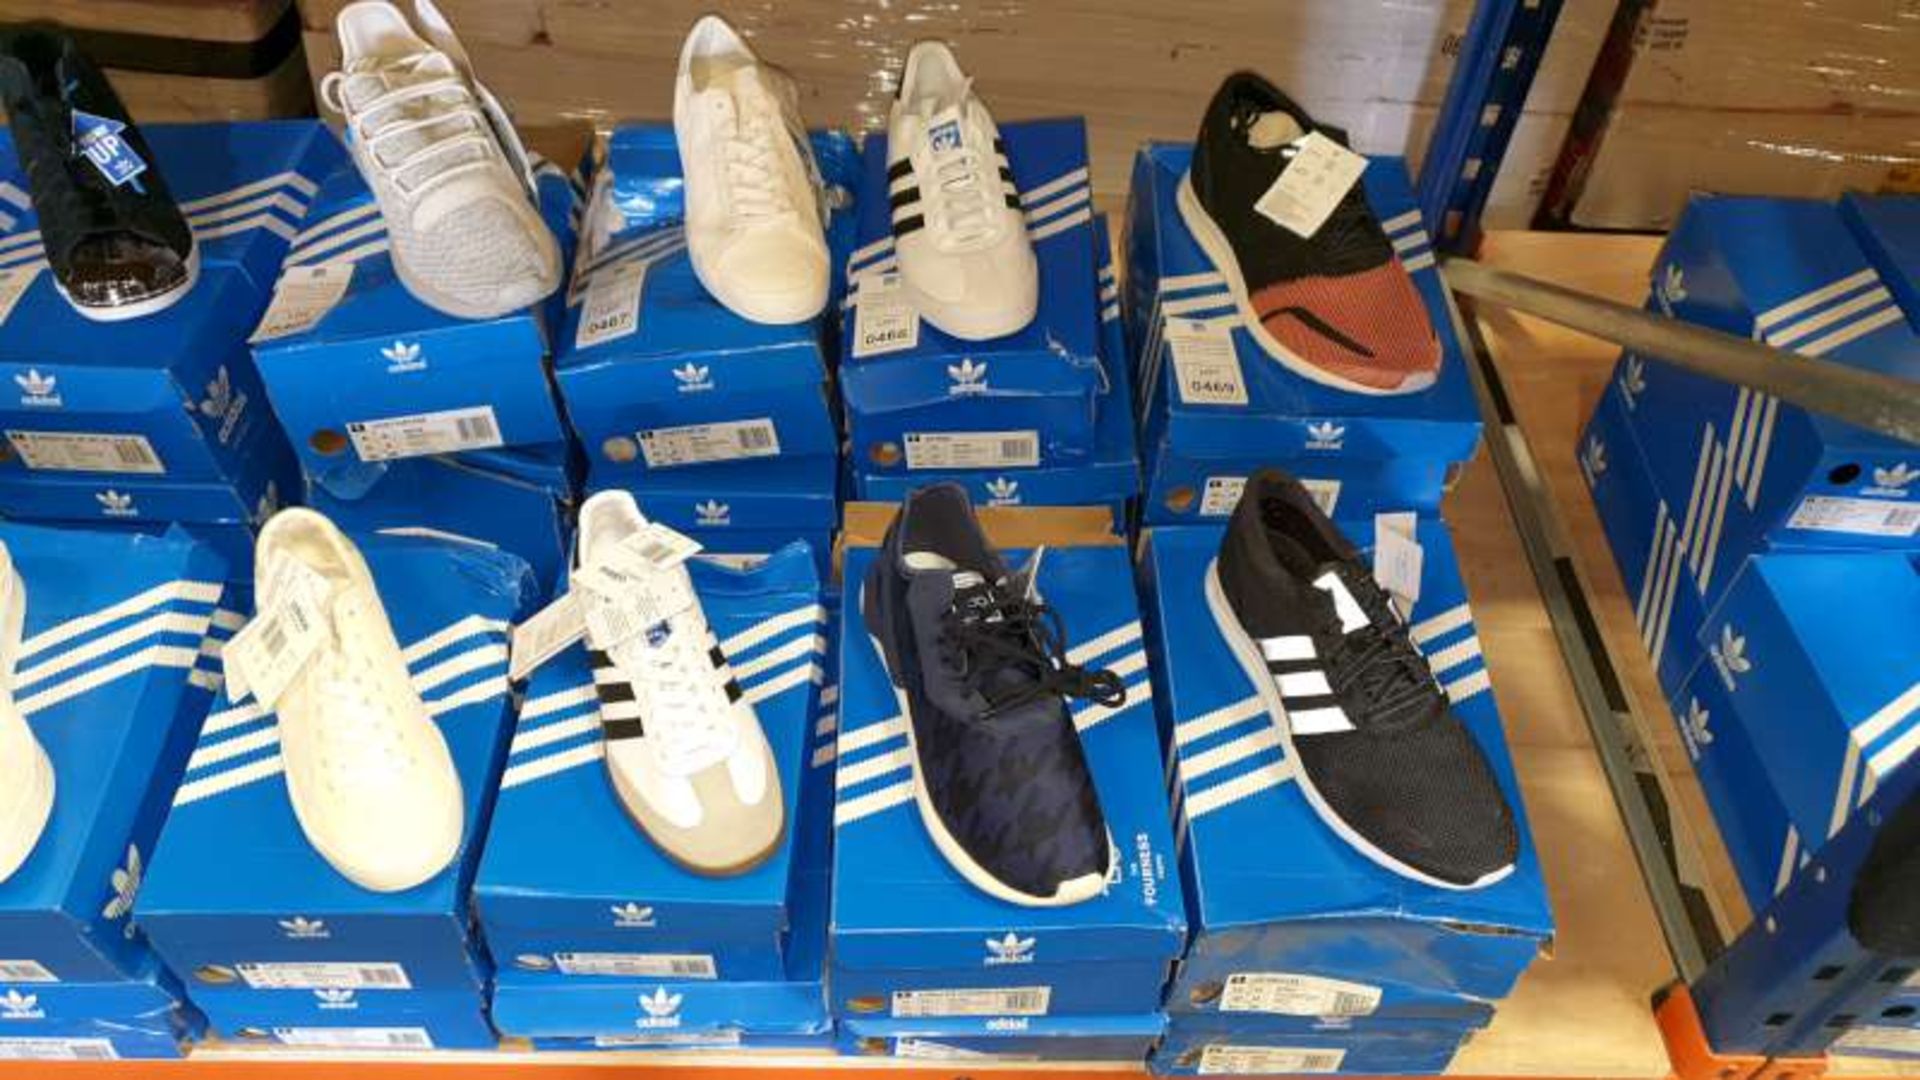 5 X PAIRS OF ADIDAS TRAINERS IN VARIOUS STYLES AND SIZES ( PLEASE NOTE BOXES ARE DAMAGED )